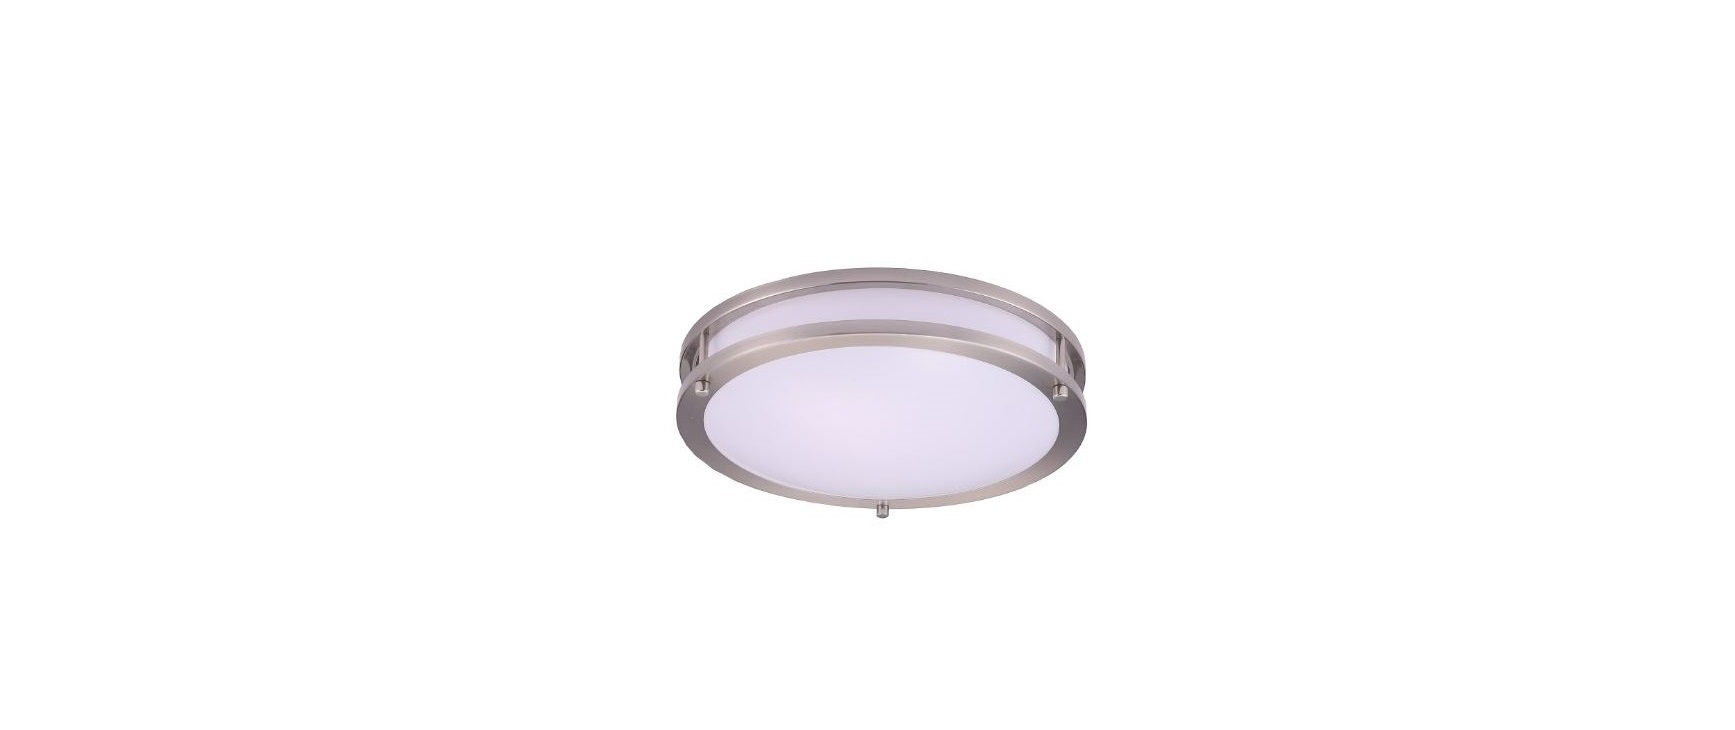 ‎A-LFMDR-10D16CCNK LED Double Ring Flushmount